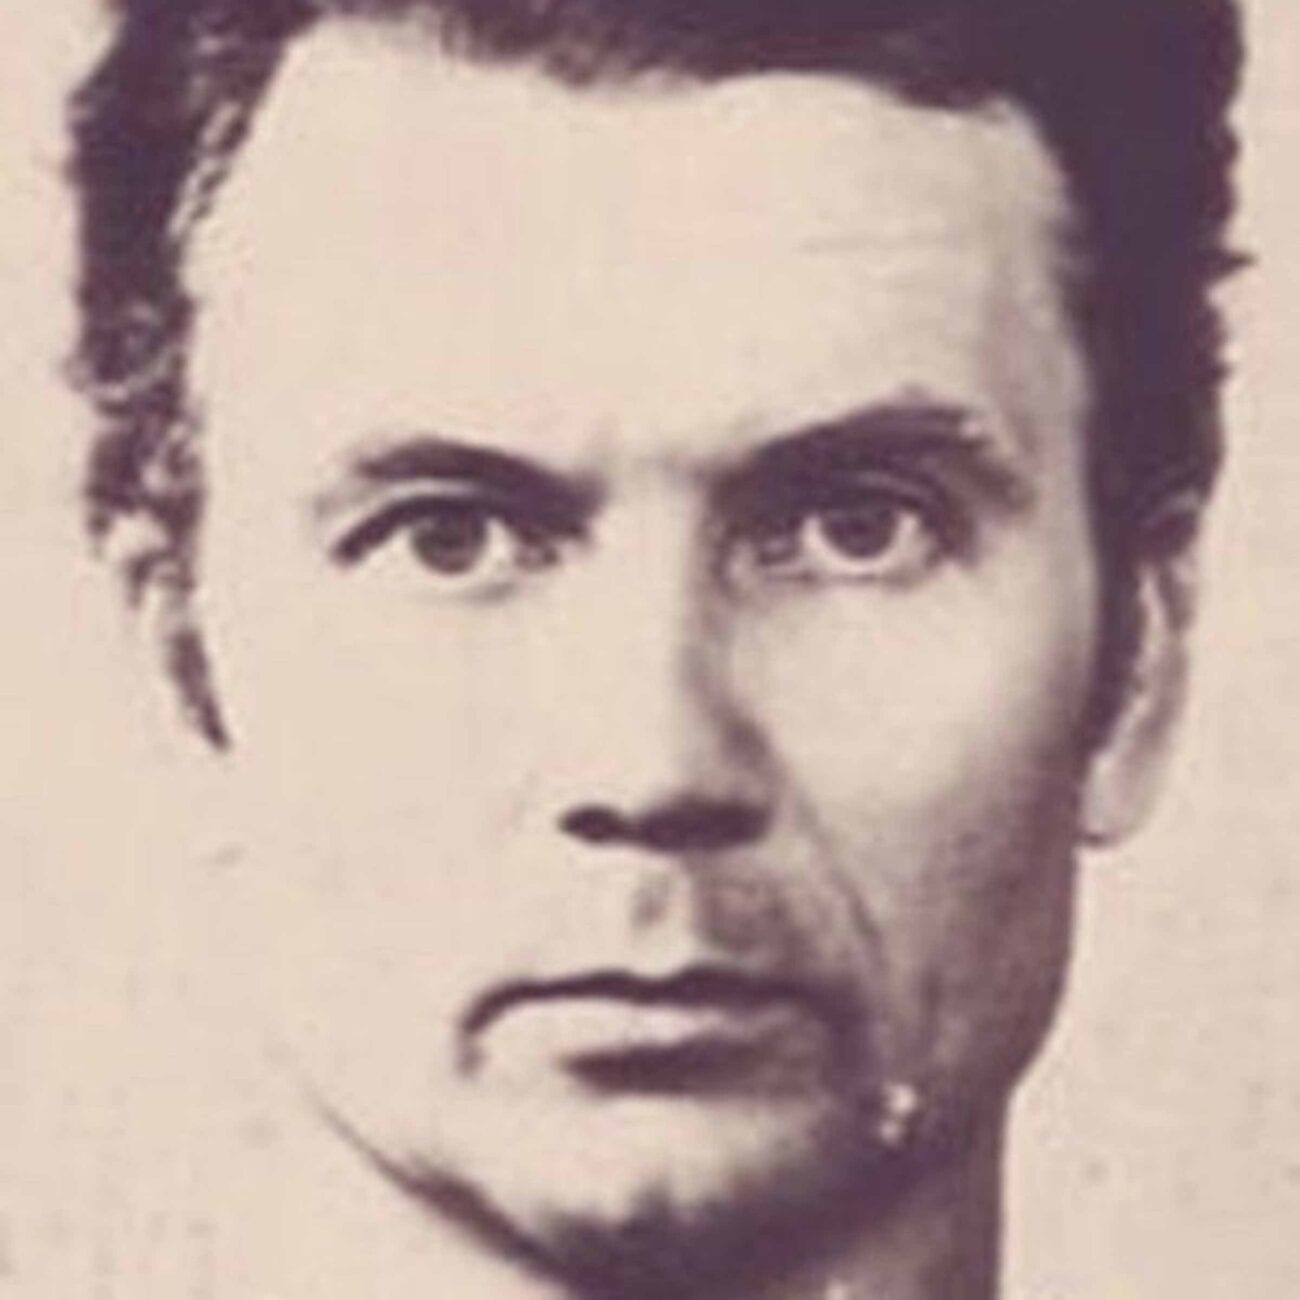 It's almost like looking in a mirror: Andrei Chikatilo was a man with a position of authority. But one wrong move, and suddenly he was a serial killer.